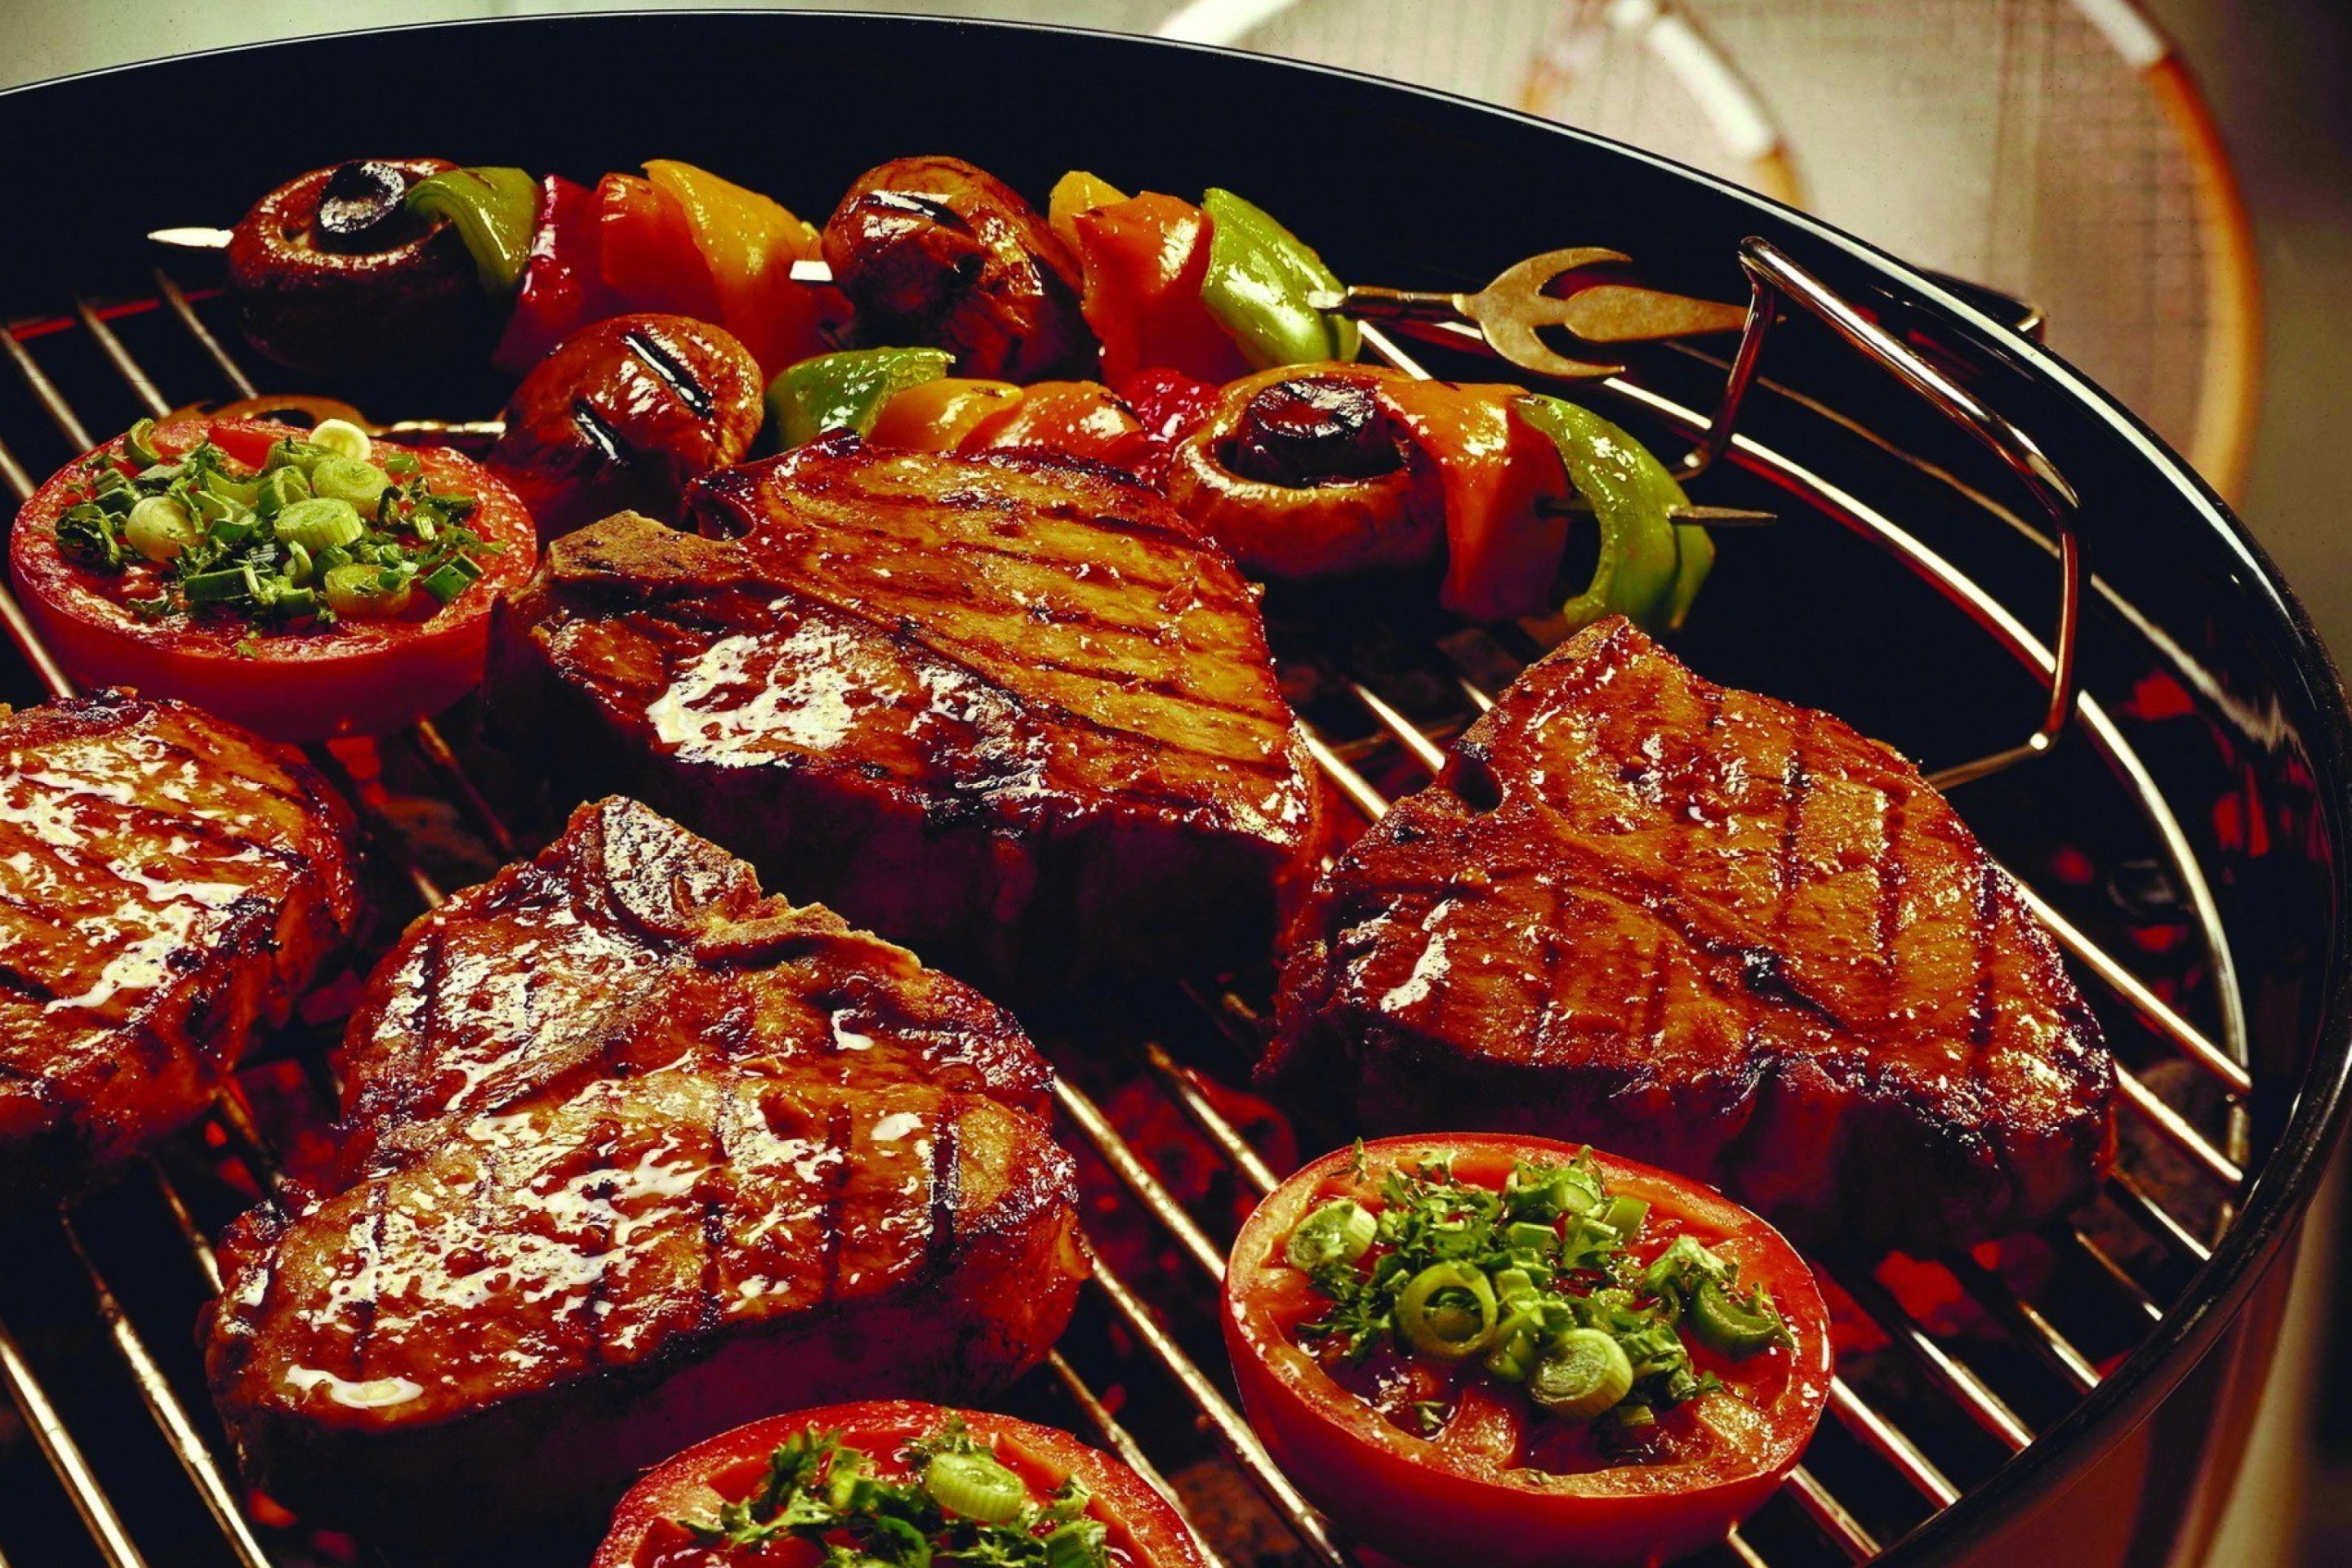 Sfondi Barbecue and Grilling Meats 2880x1920